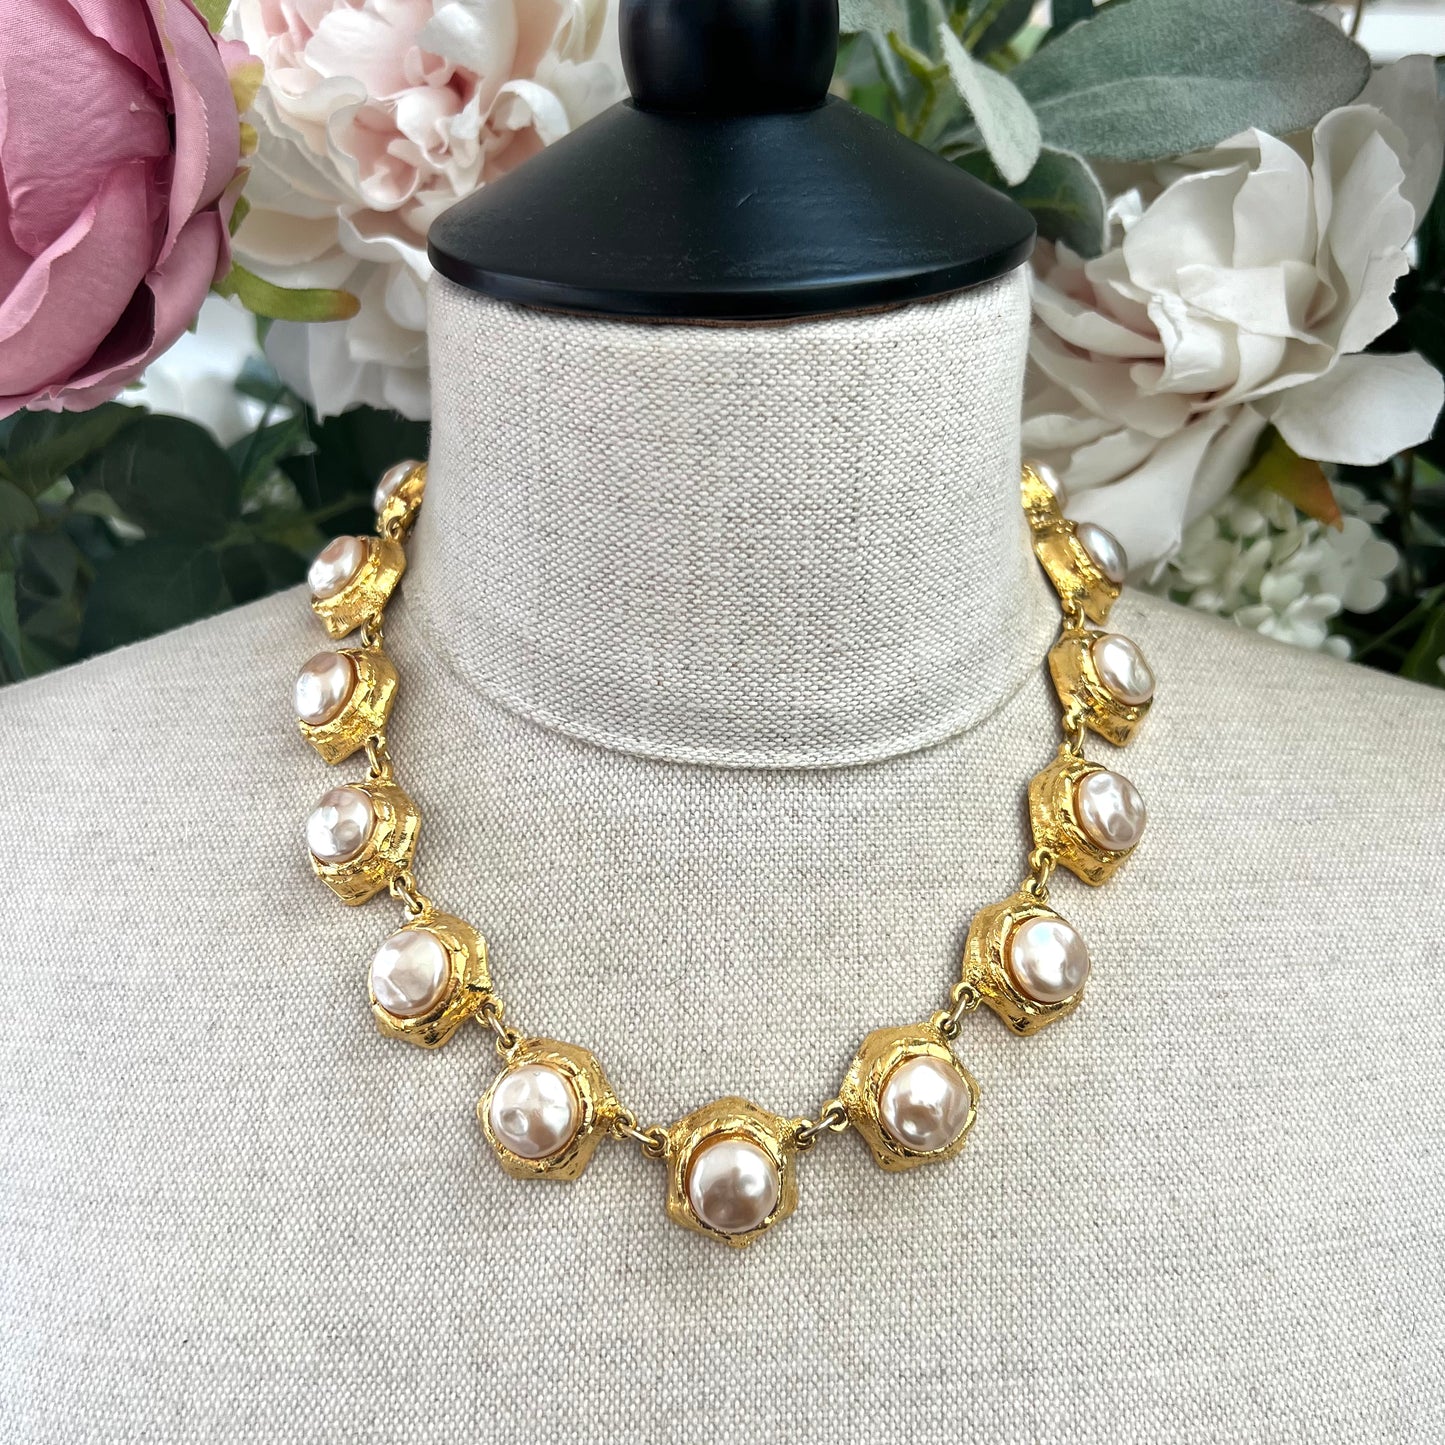 Sarah Booth Etruscan Revival Faux Mabe Pearl Necklace and Clip On Earrings